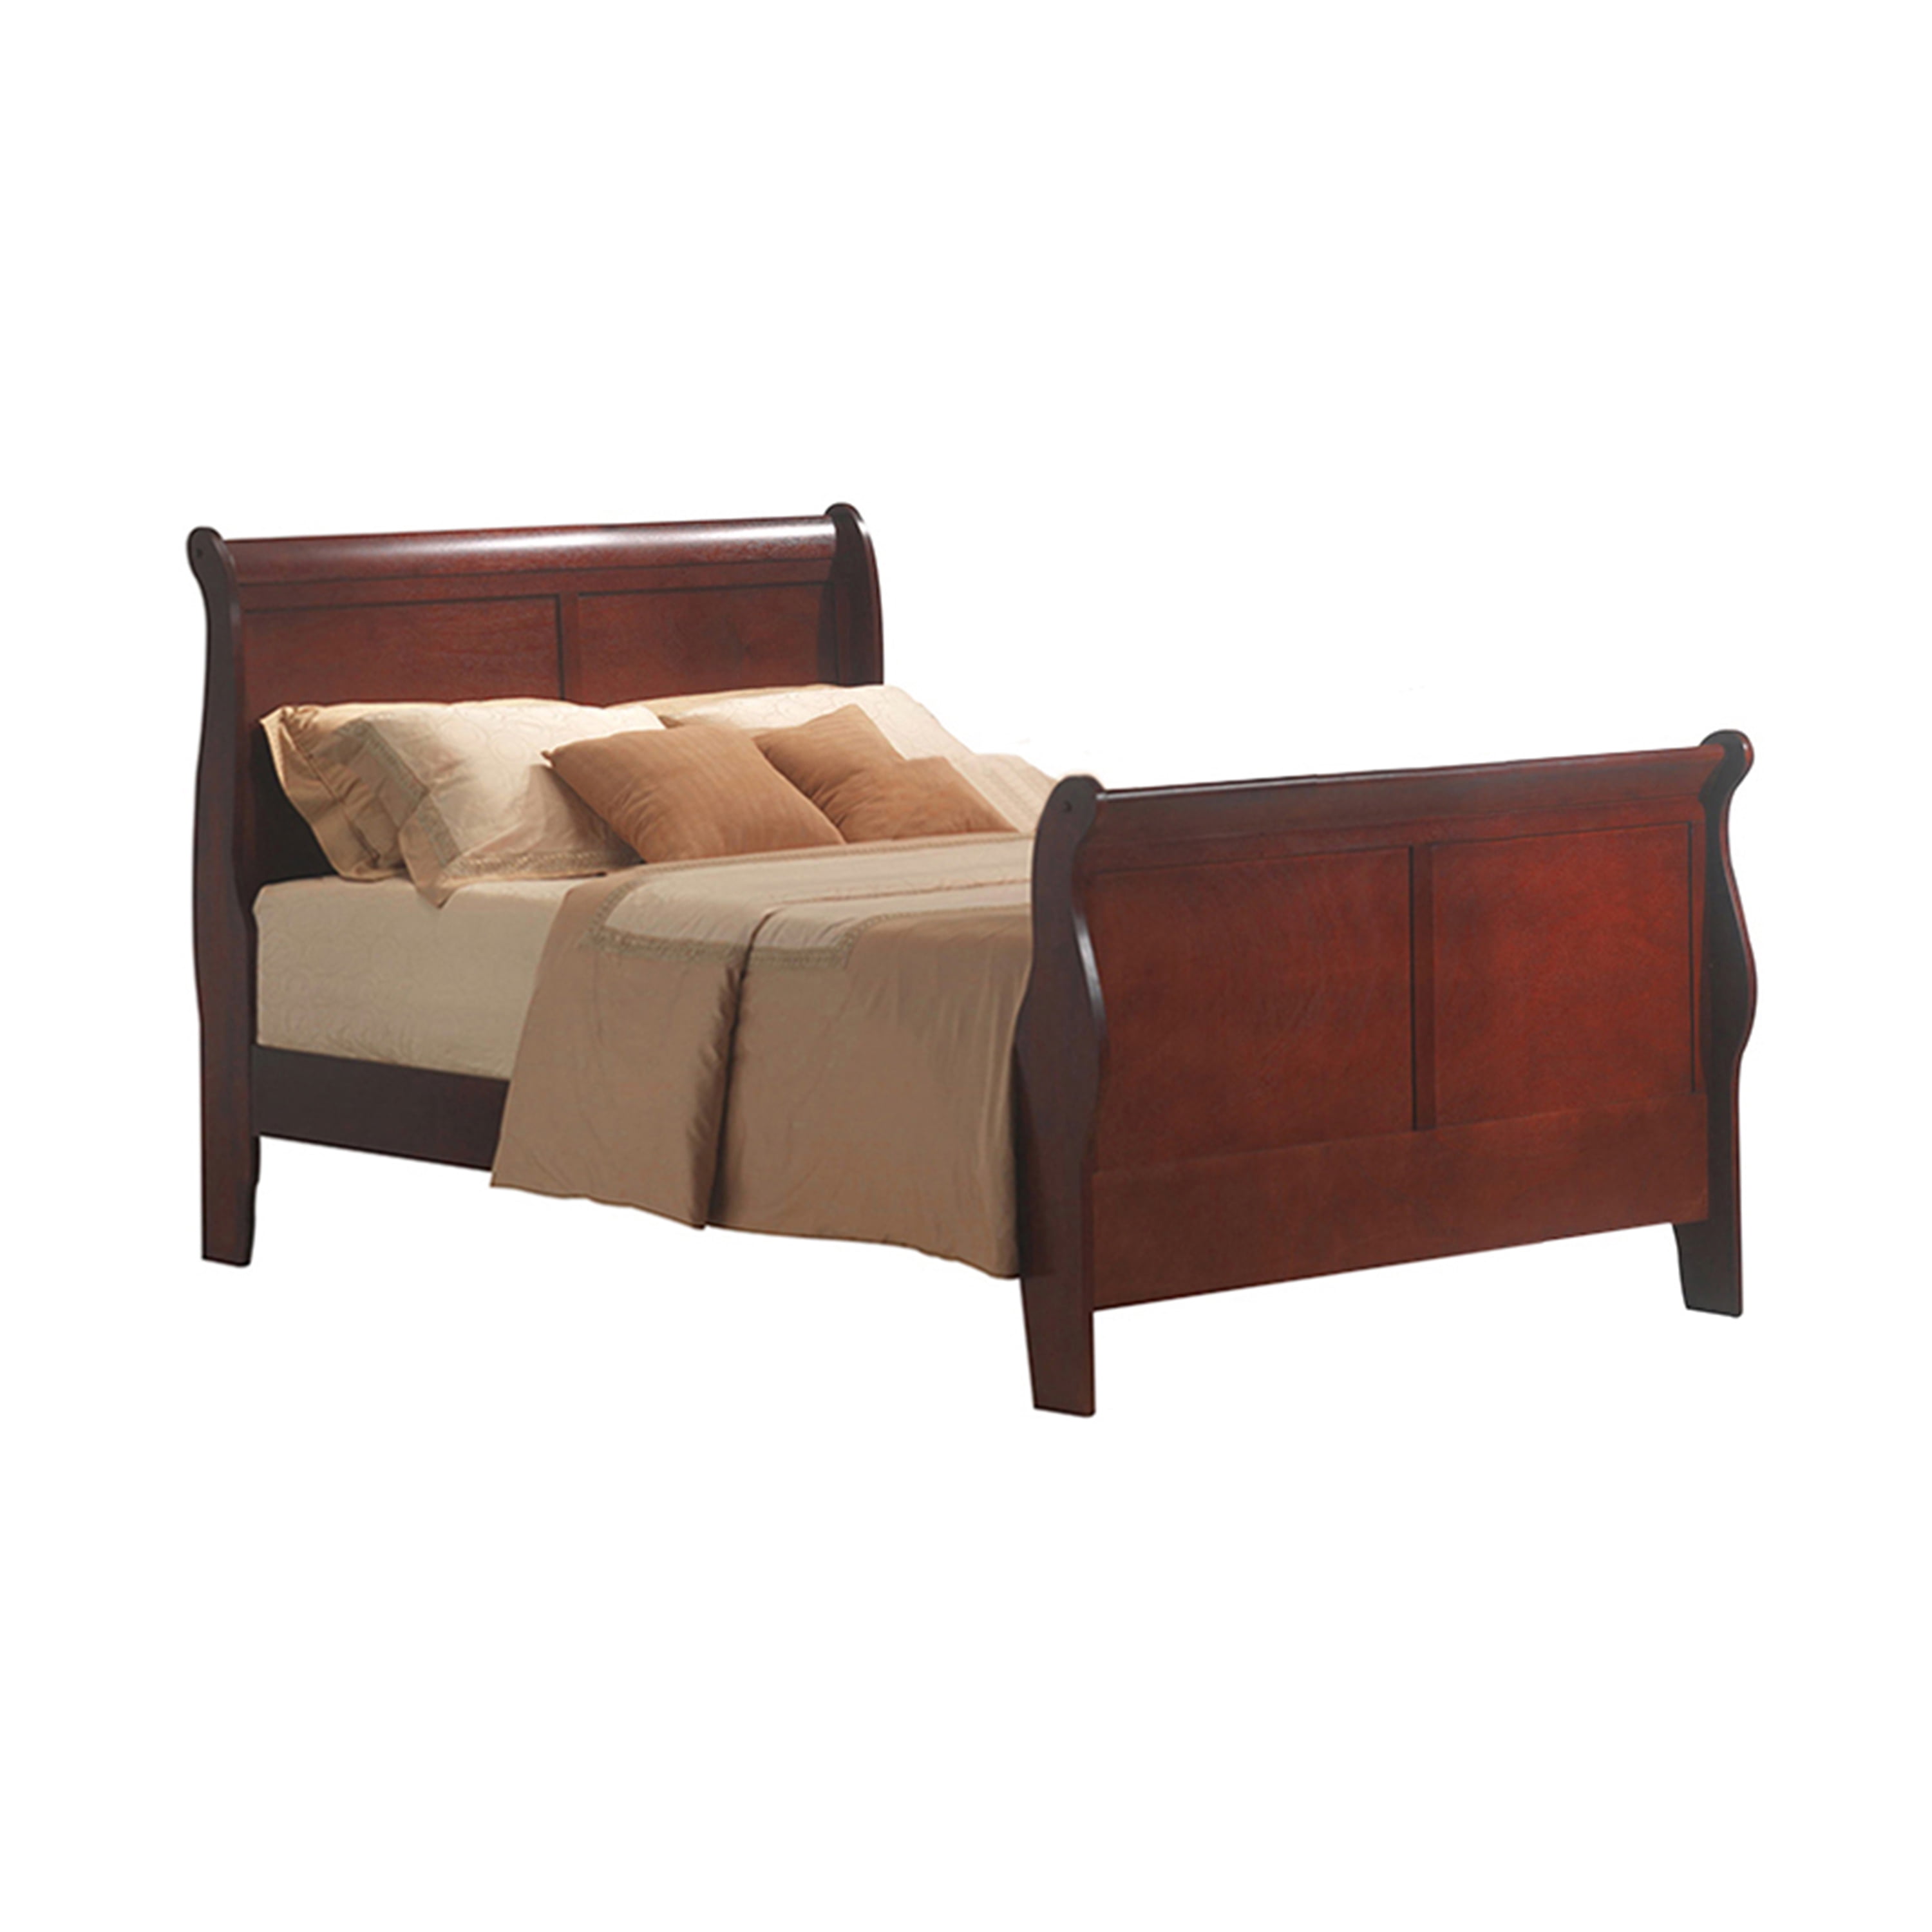 Cherry Finish Twin Full Wooden Panel Headboard Bedroom Furniture Bed Frame Mount 